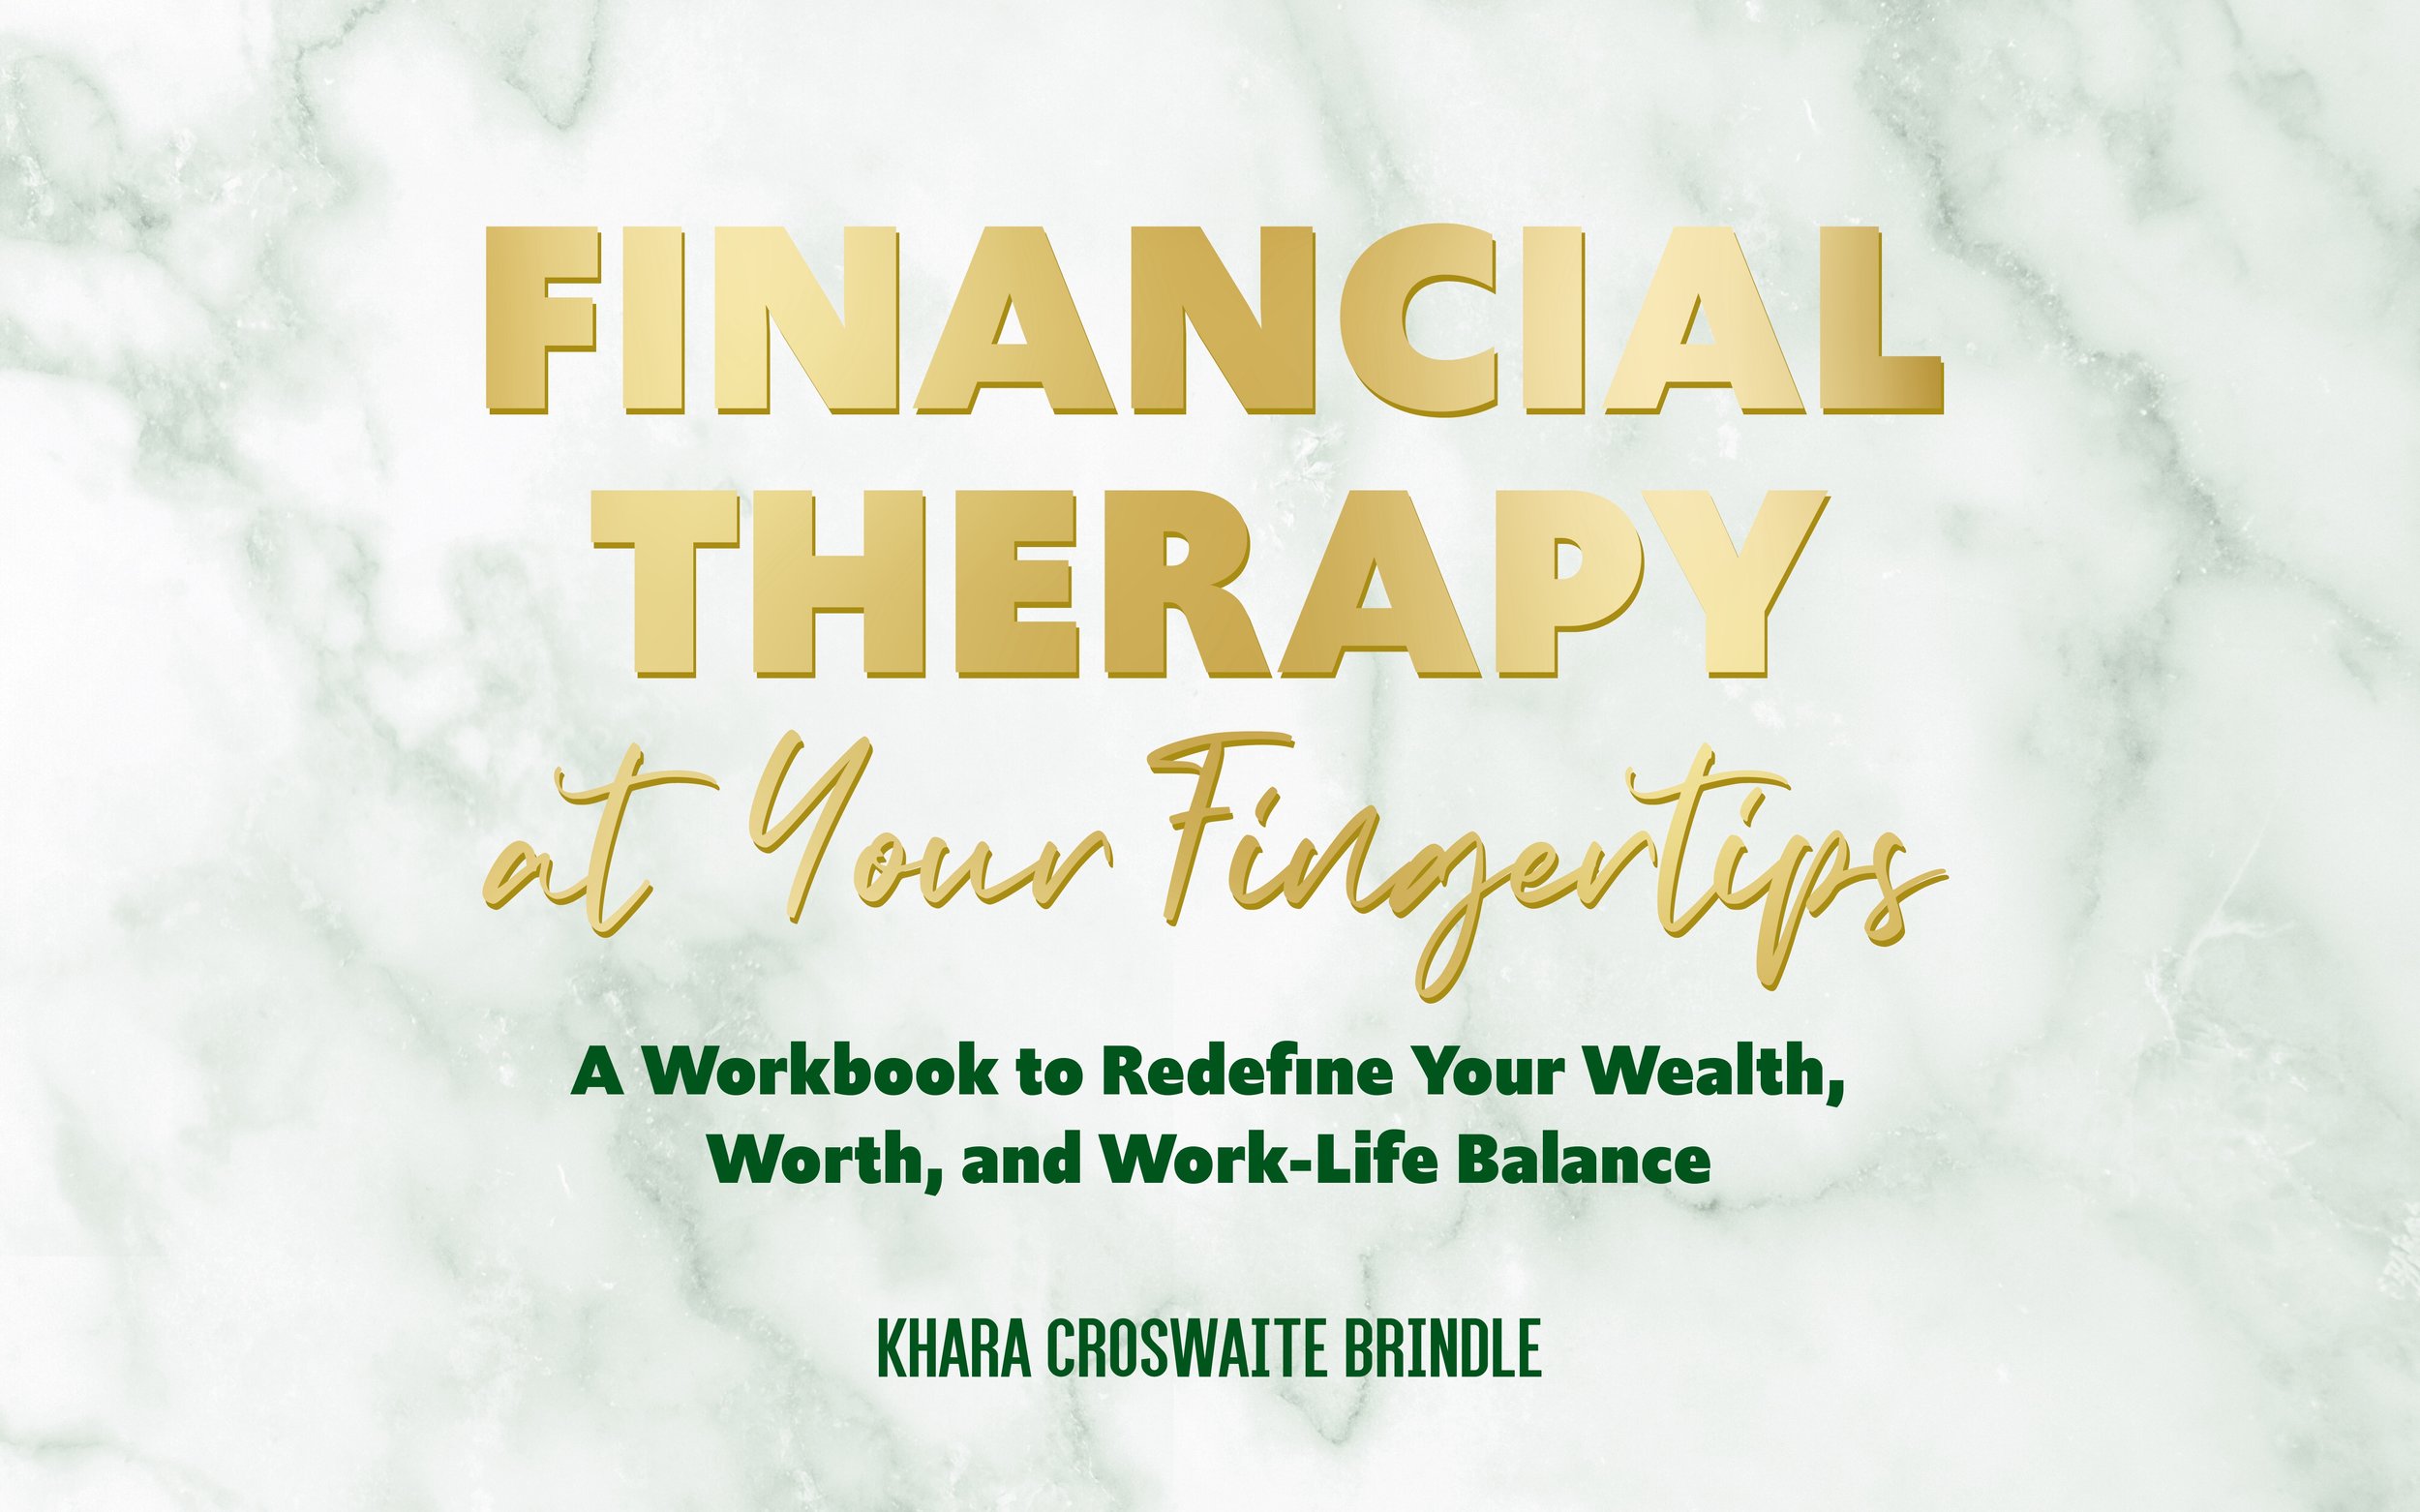 Financial Therapy at Your Fingertips_e-book marketing cover image_5MB.jpg